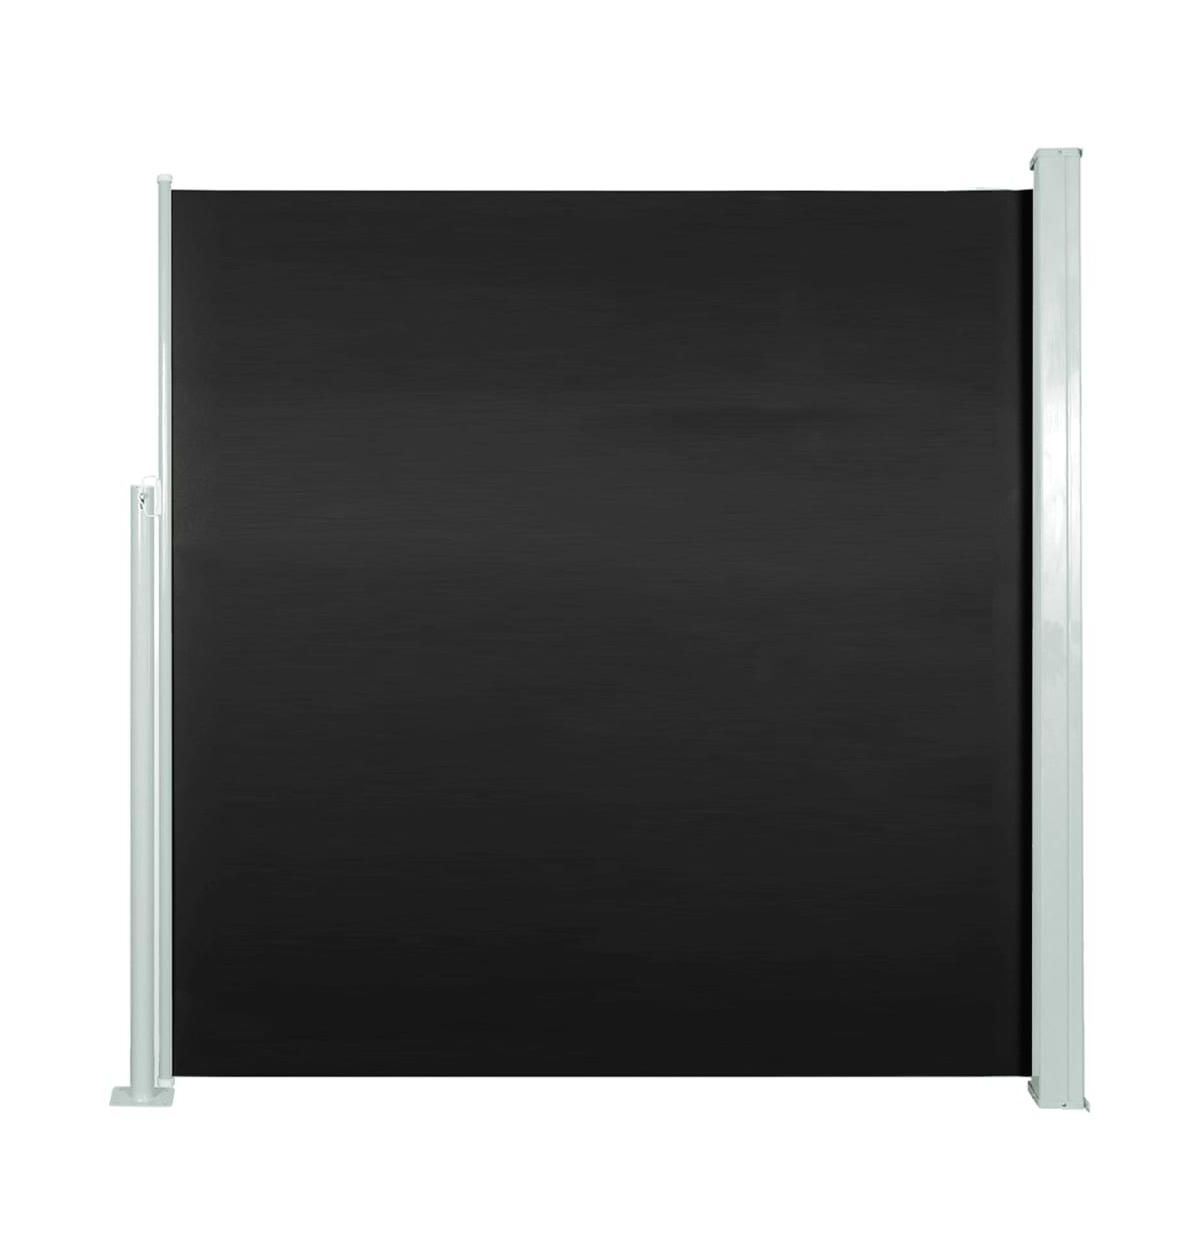 Retractable Side Awning 55.1"x118.1"Black - Black